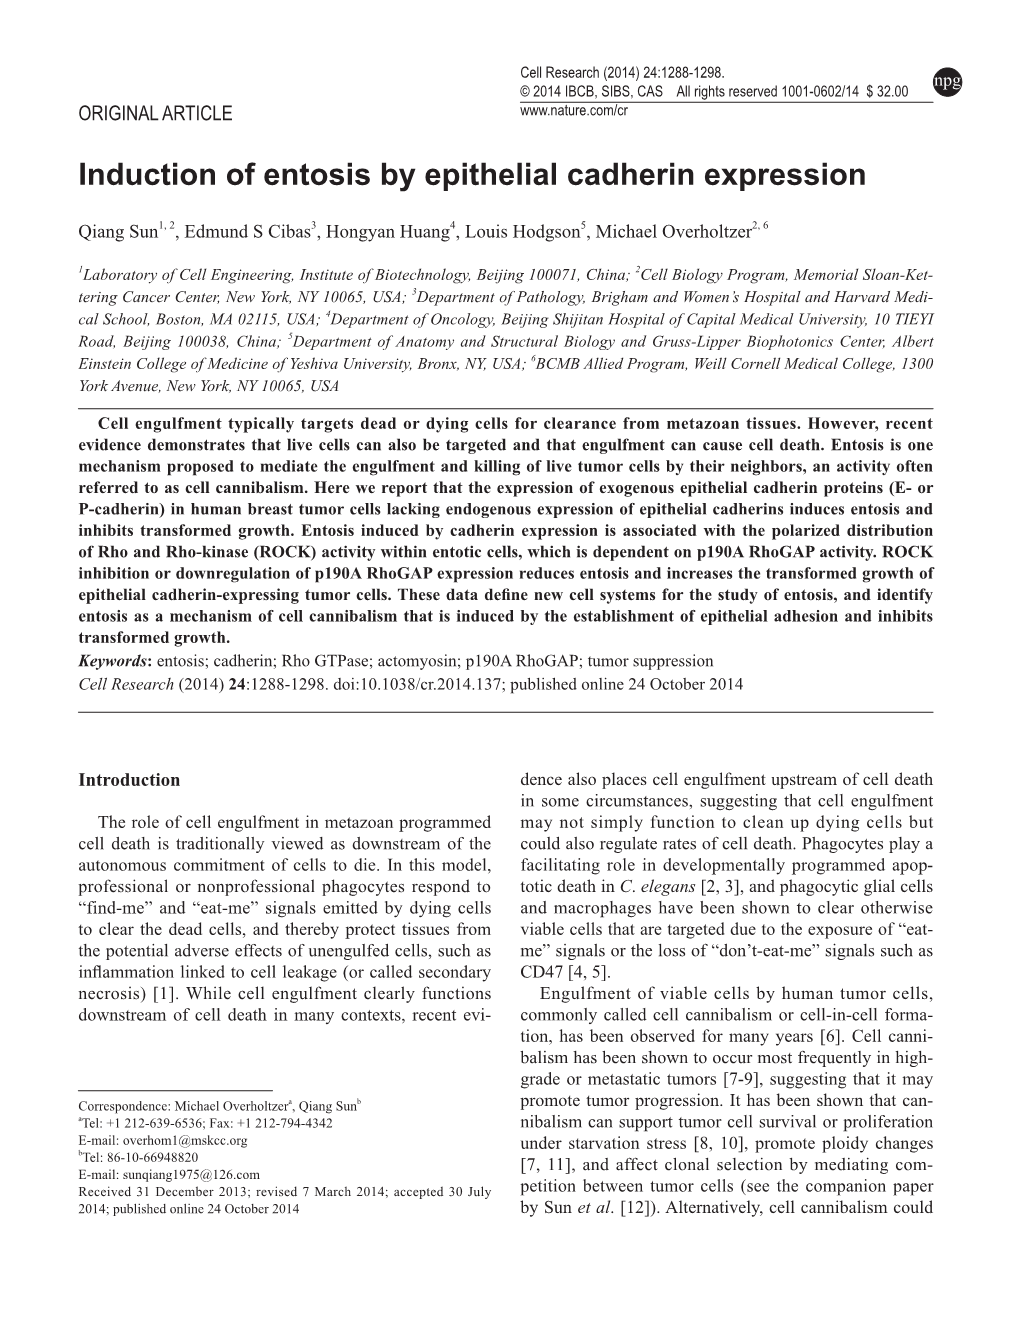 Induction of Entosis by Epithelial Cadherin Expression